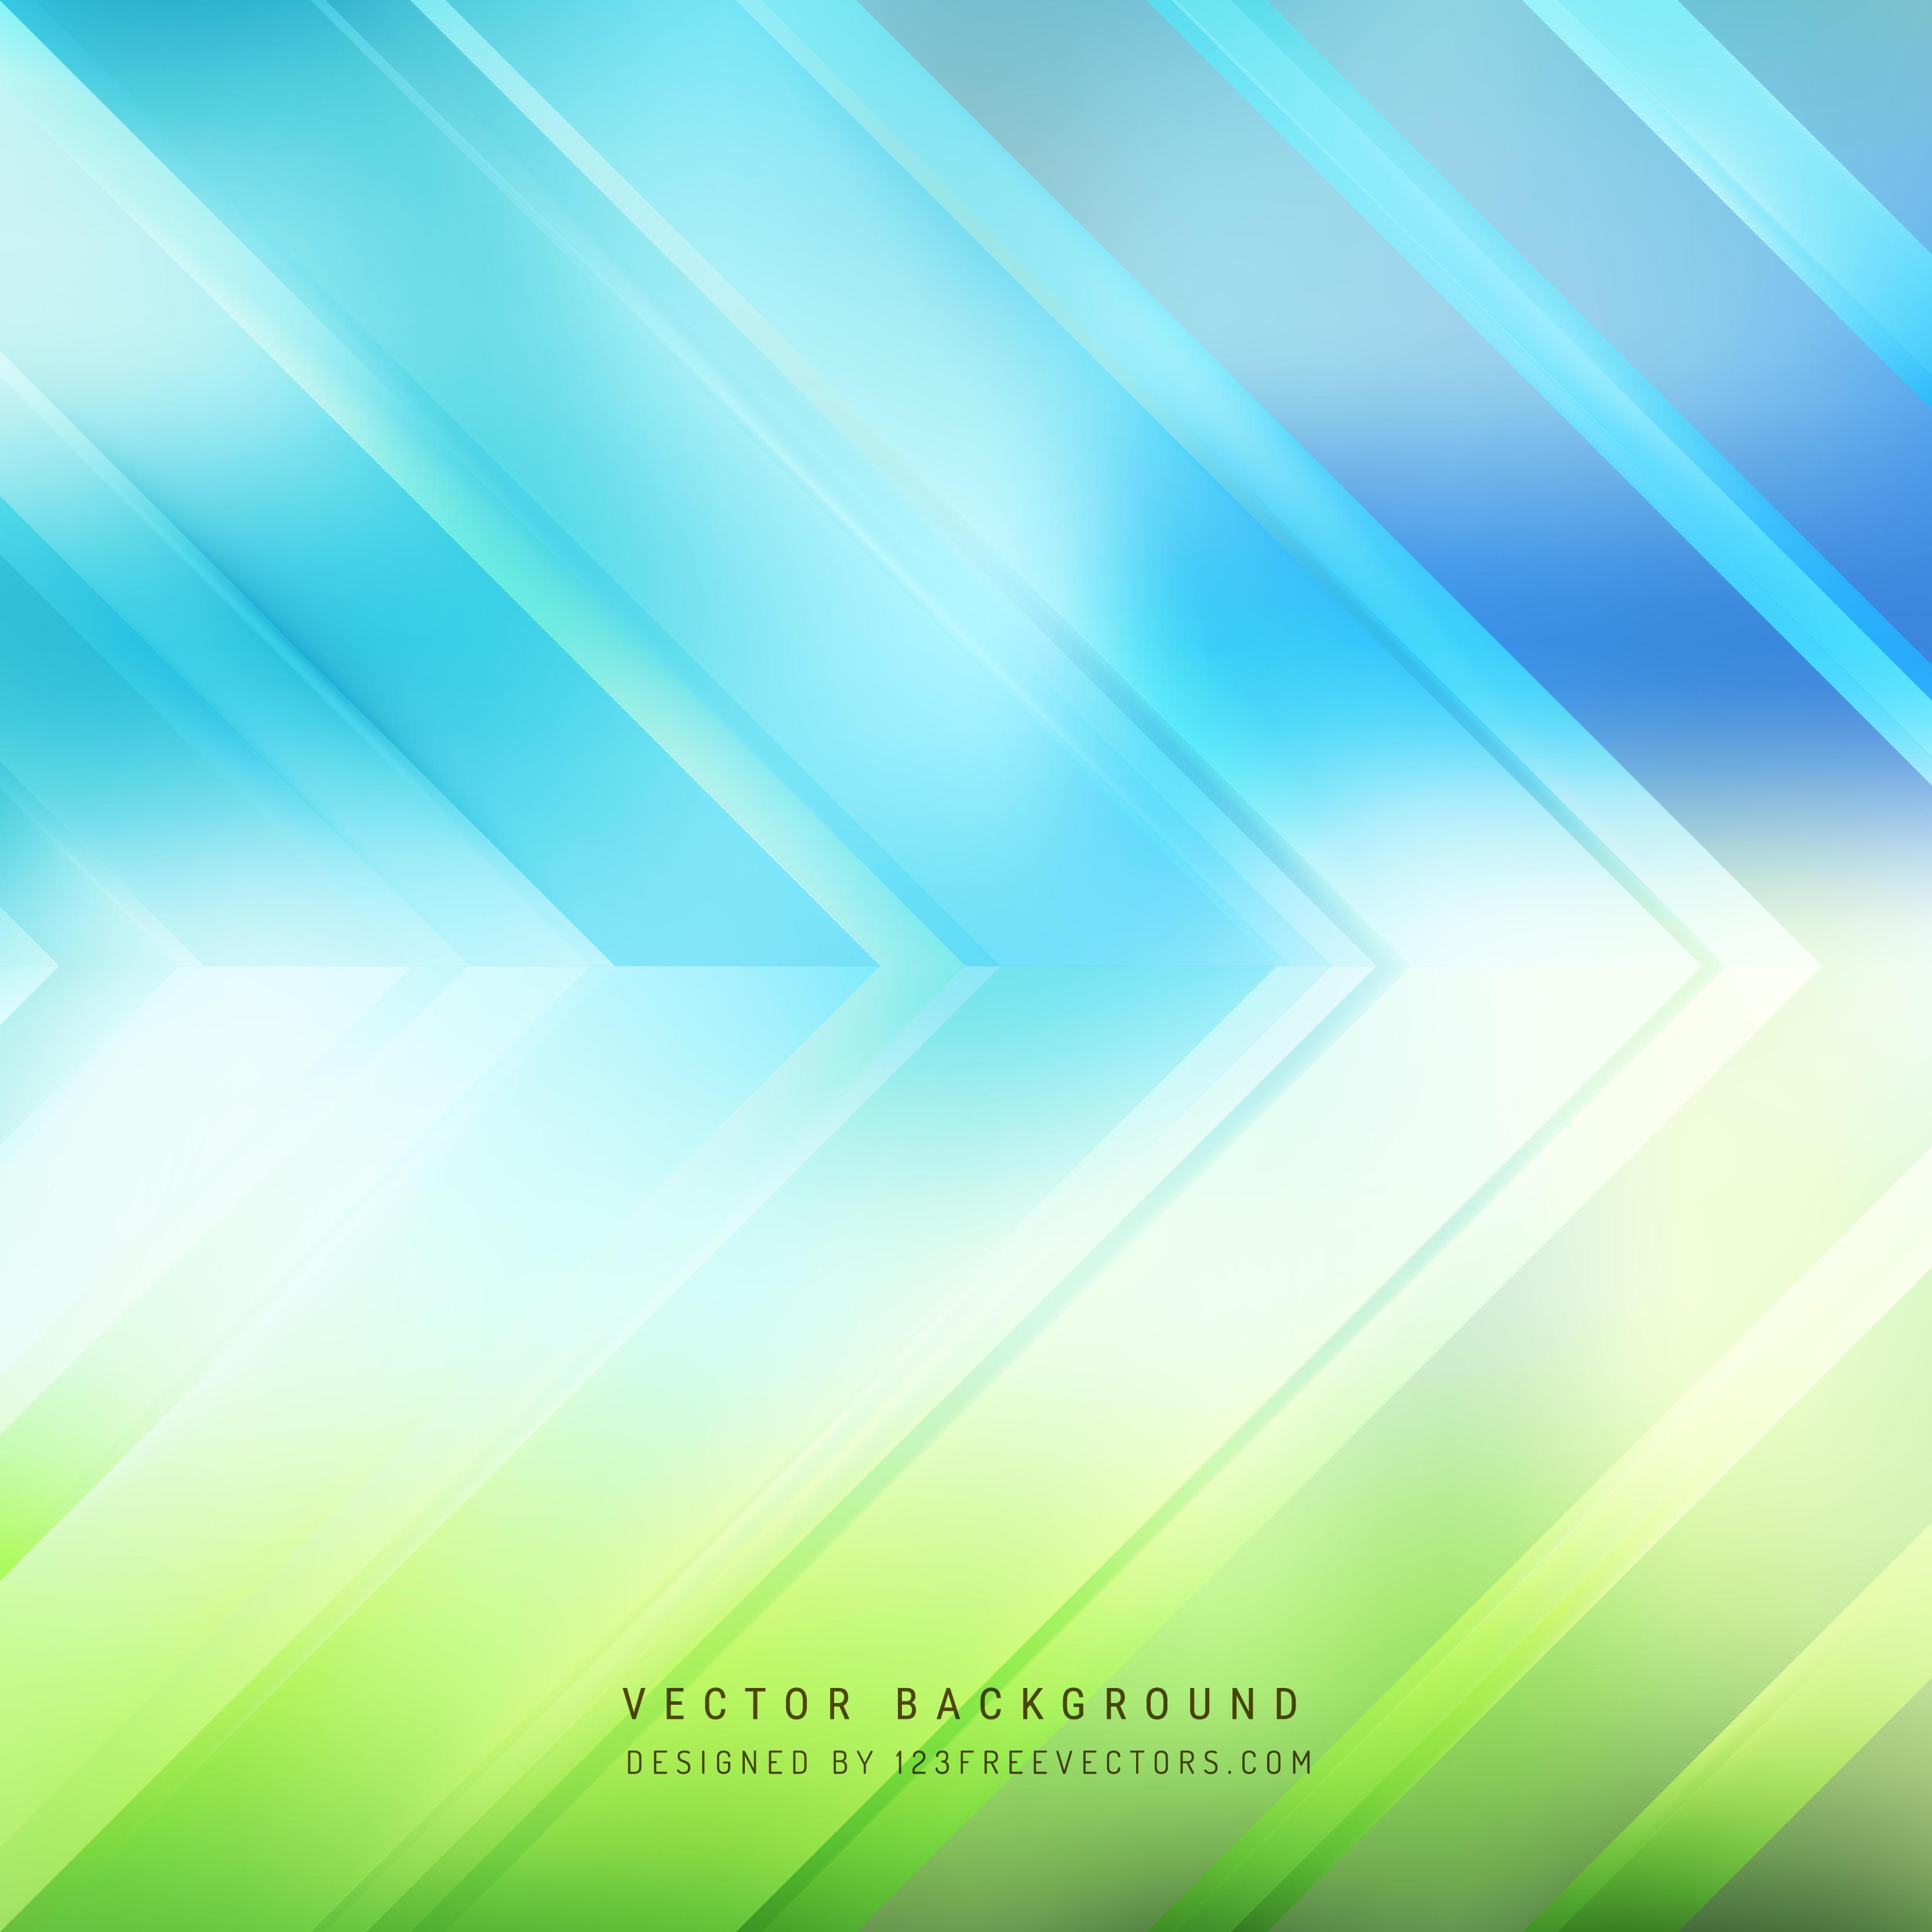 Abstract Blue Green Arrow Background